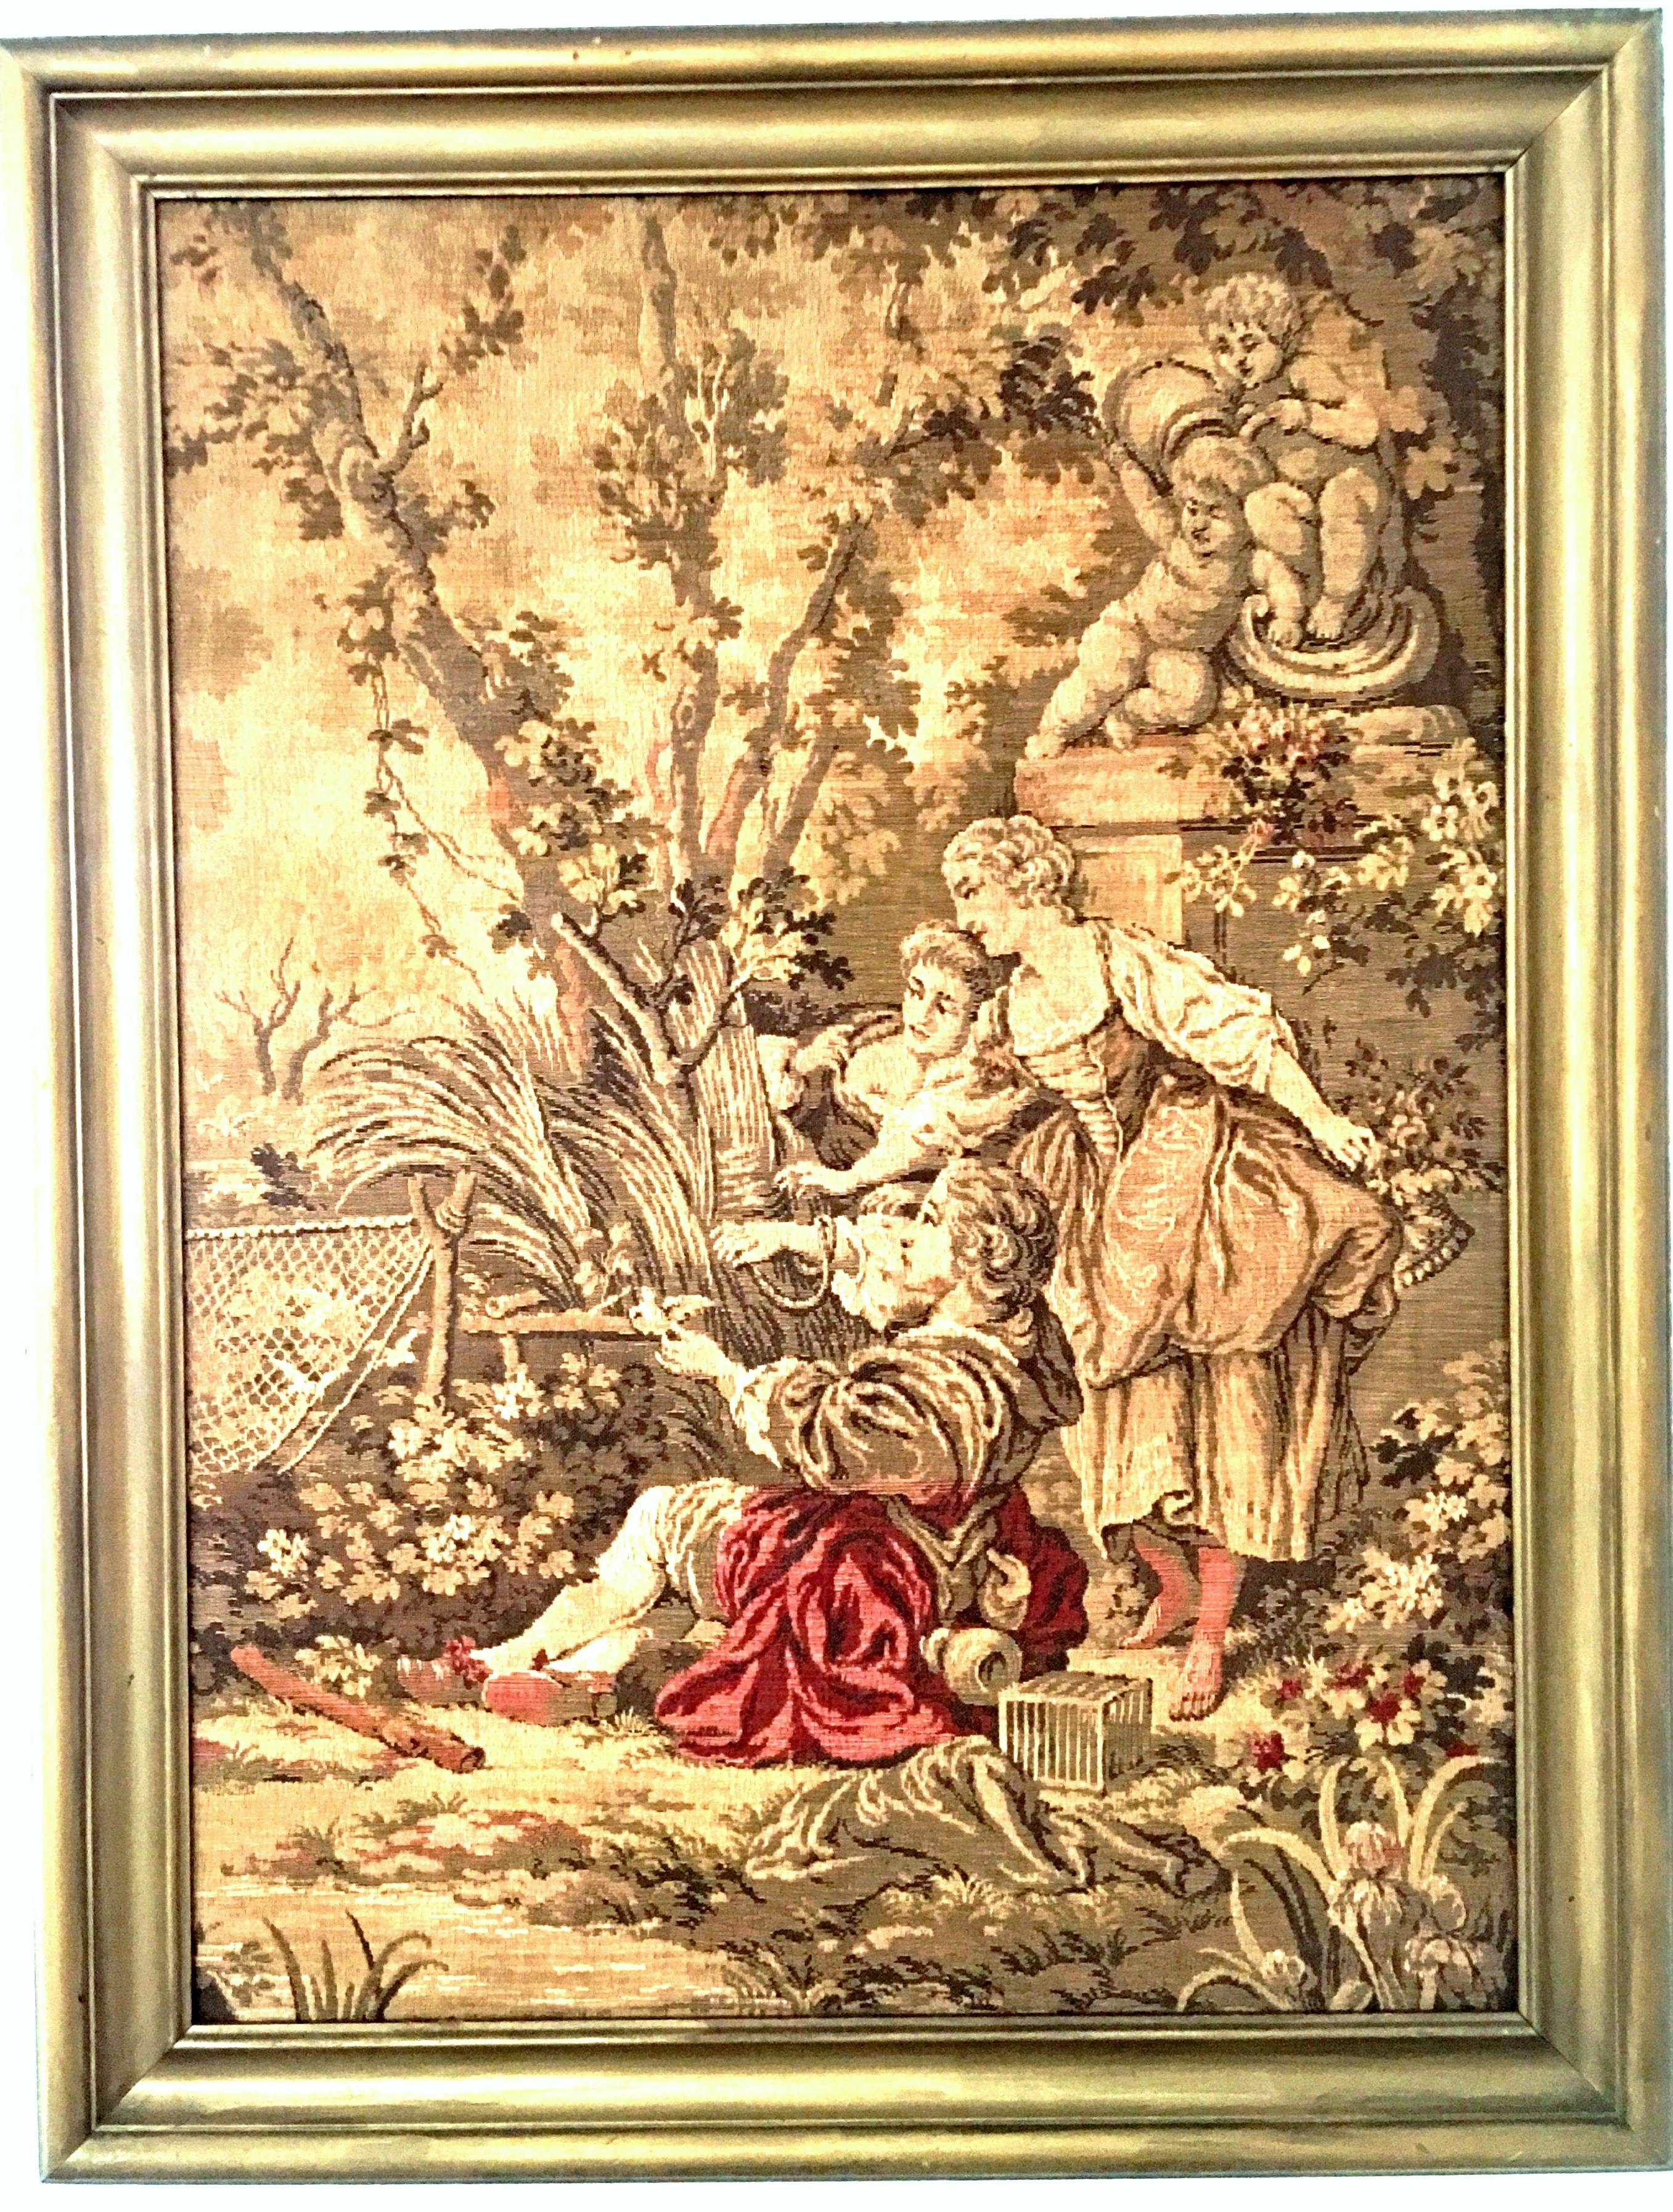 Mid-Century Belgium hanging framed tapestry, signed. This gorgeous wool golden hue tapestry is framed in a gilt wood frame. Features a 17th century trio of women in the garden motif. Signed on the underside, Made In Belgium.